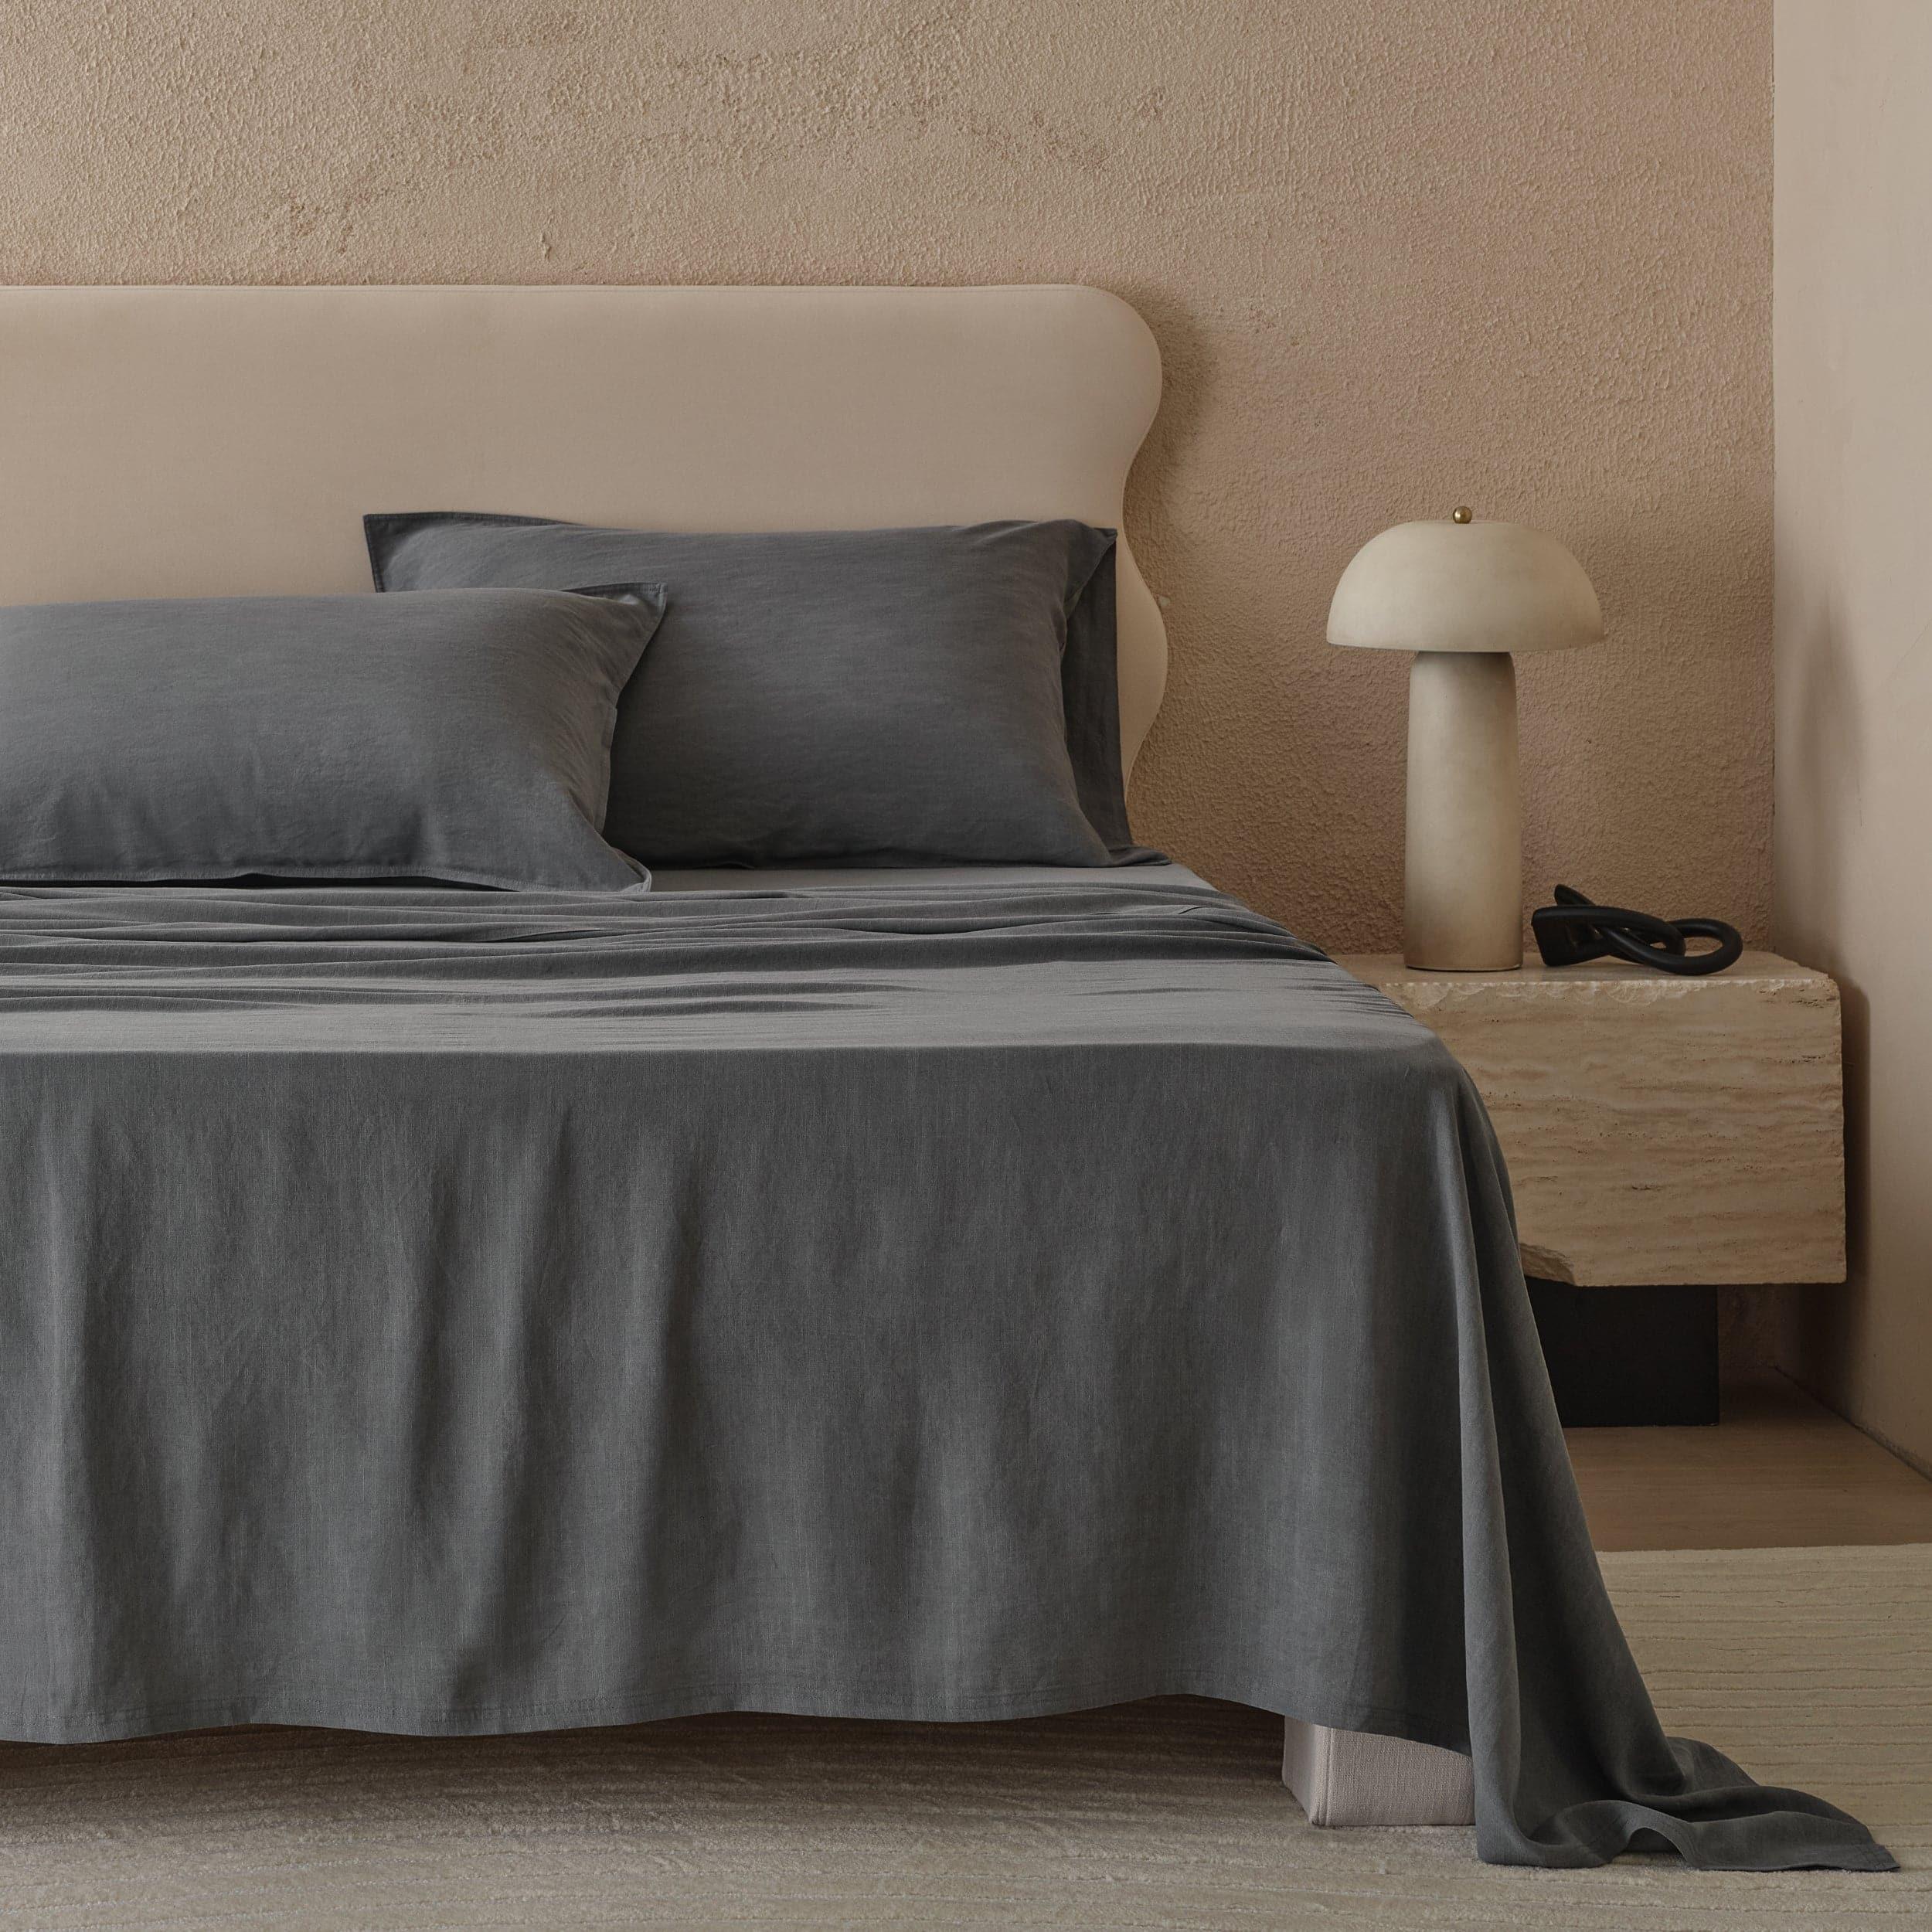 Choose from a variety of queen sheet sets to personalize your sleep space.